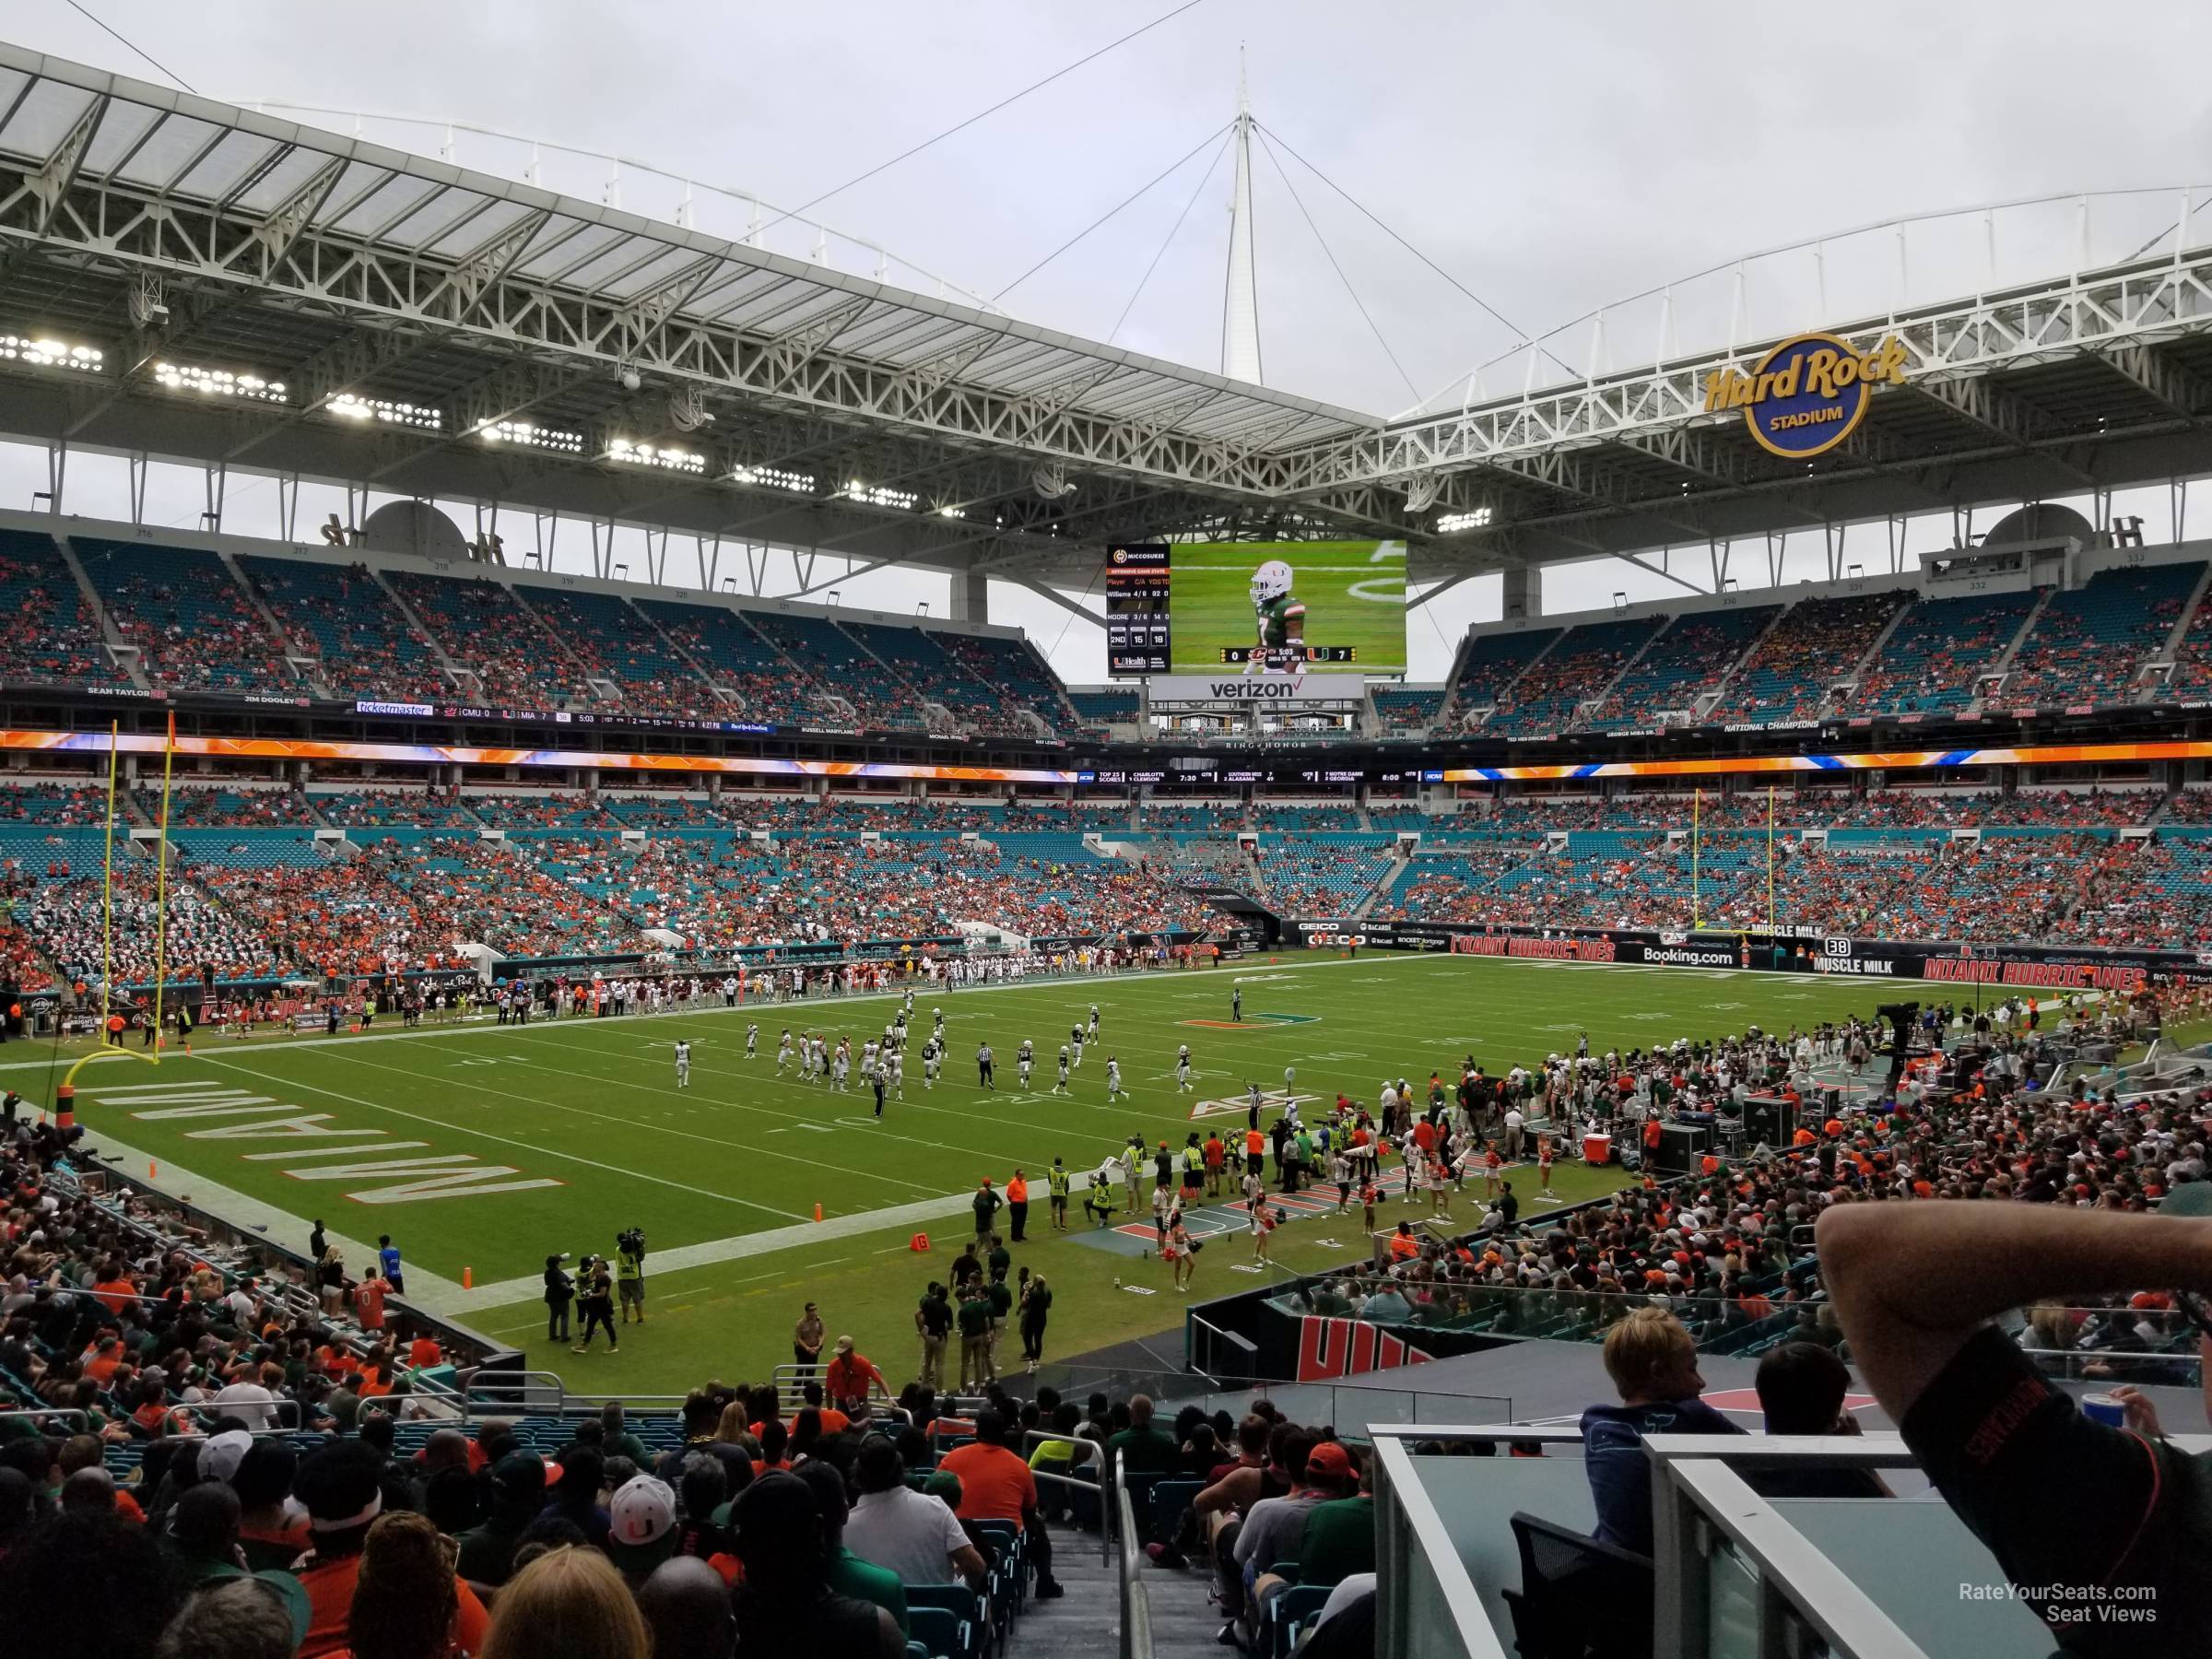 section 154, row 28 seat view  for football - hard rock stadium